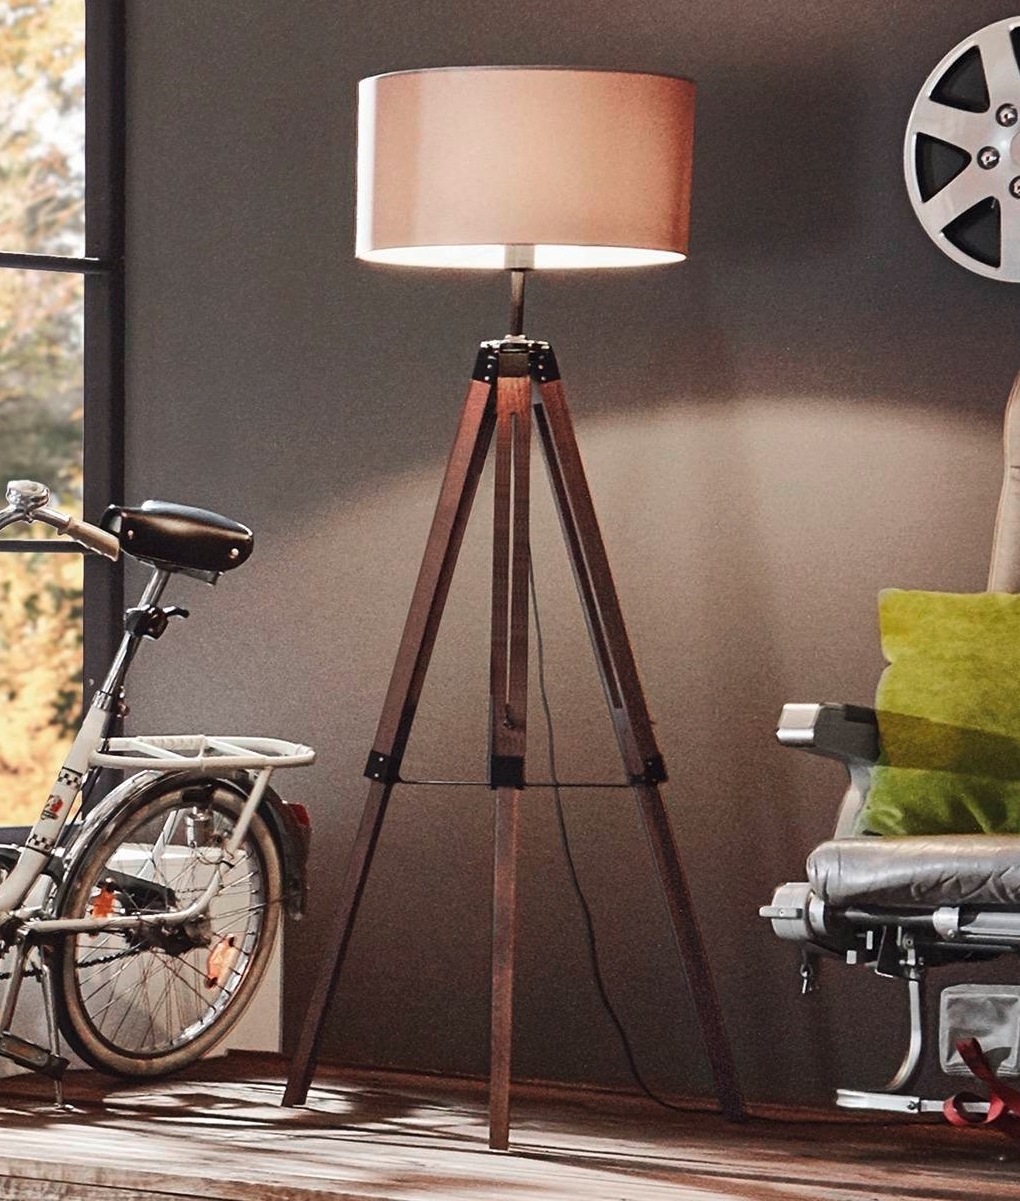 Wooden Tripod Floor Lamp With Large, Wooden Tripod Table Lamps Uk